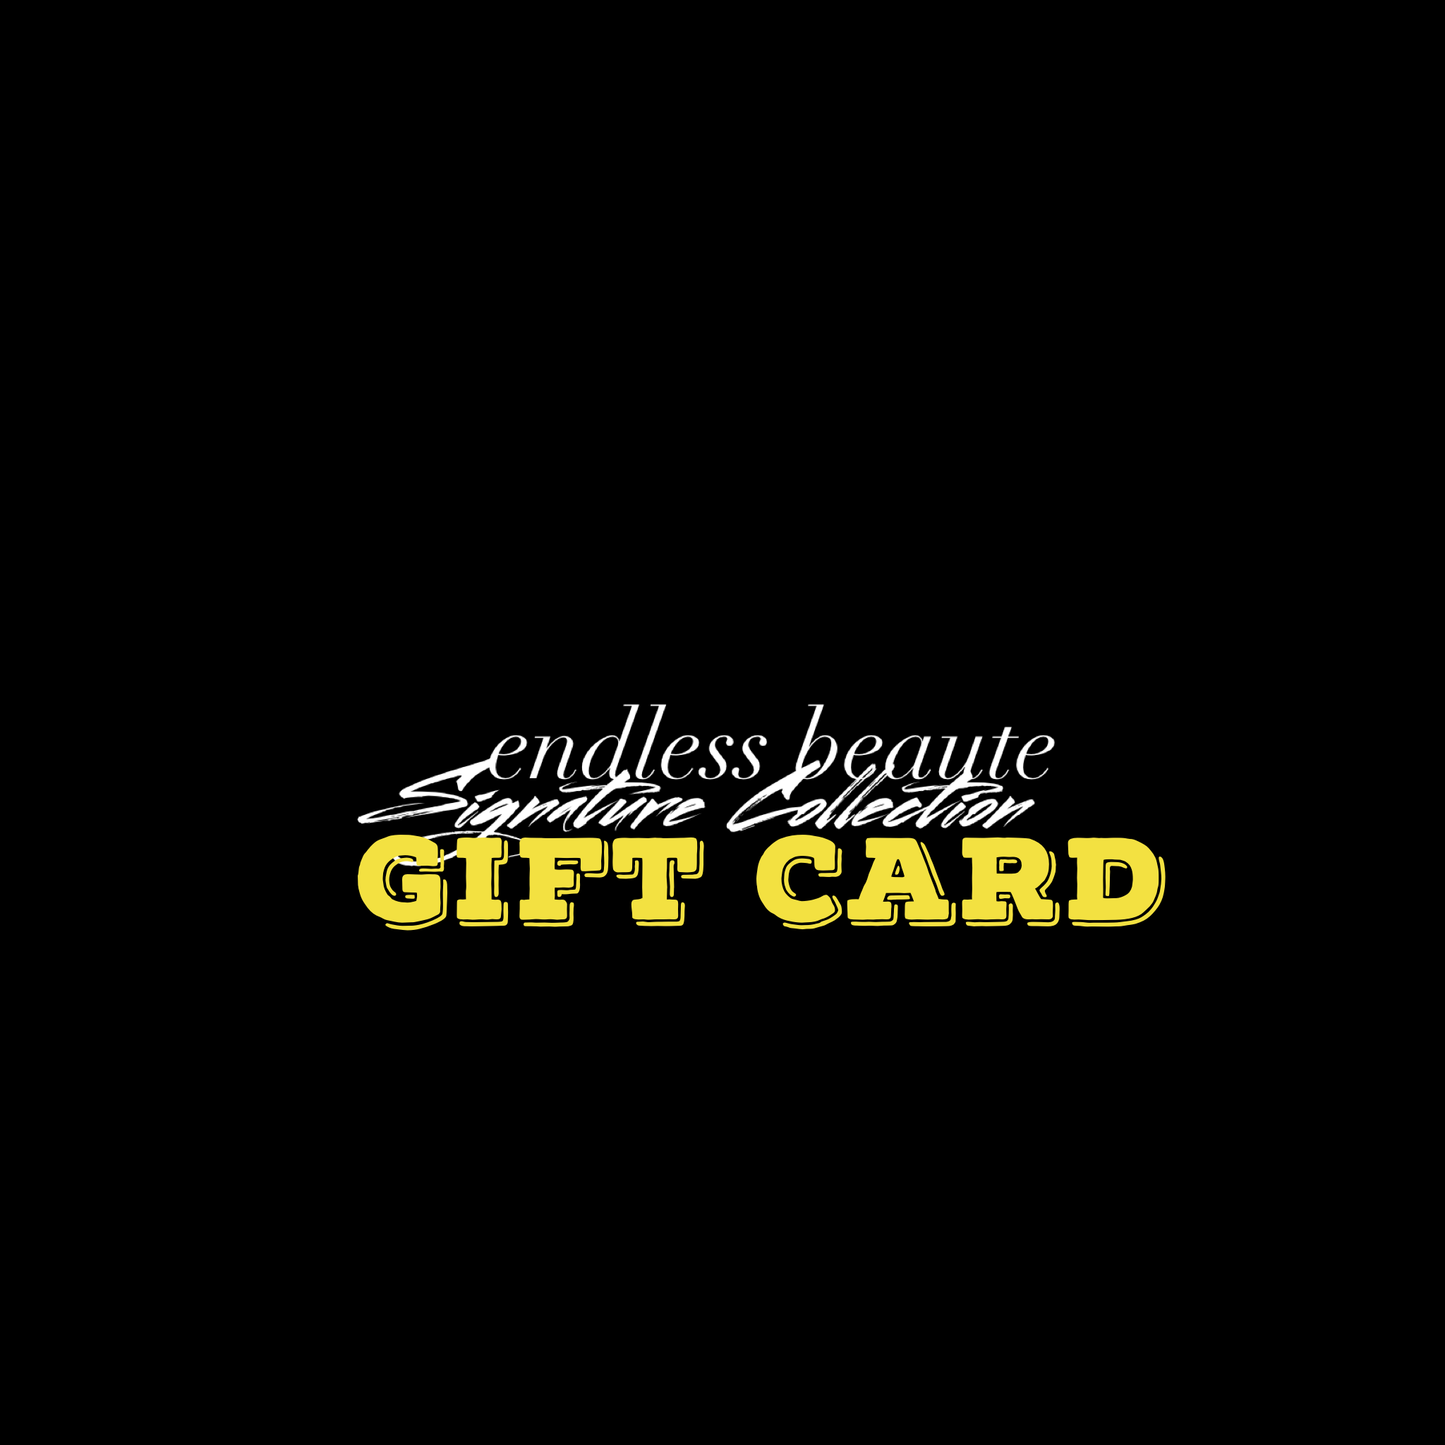 Gift Card - Endless Beaute